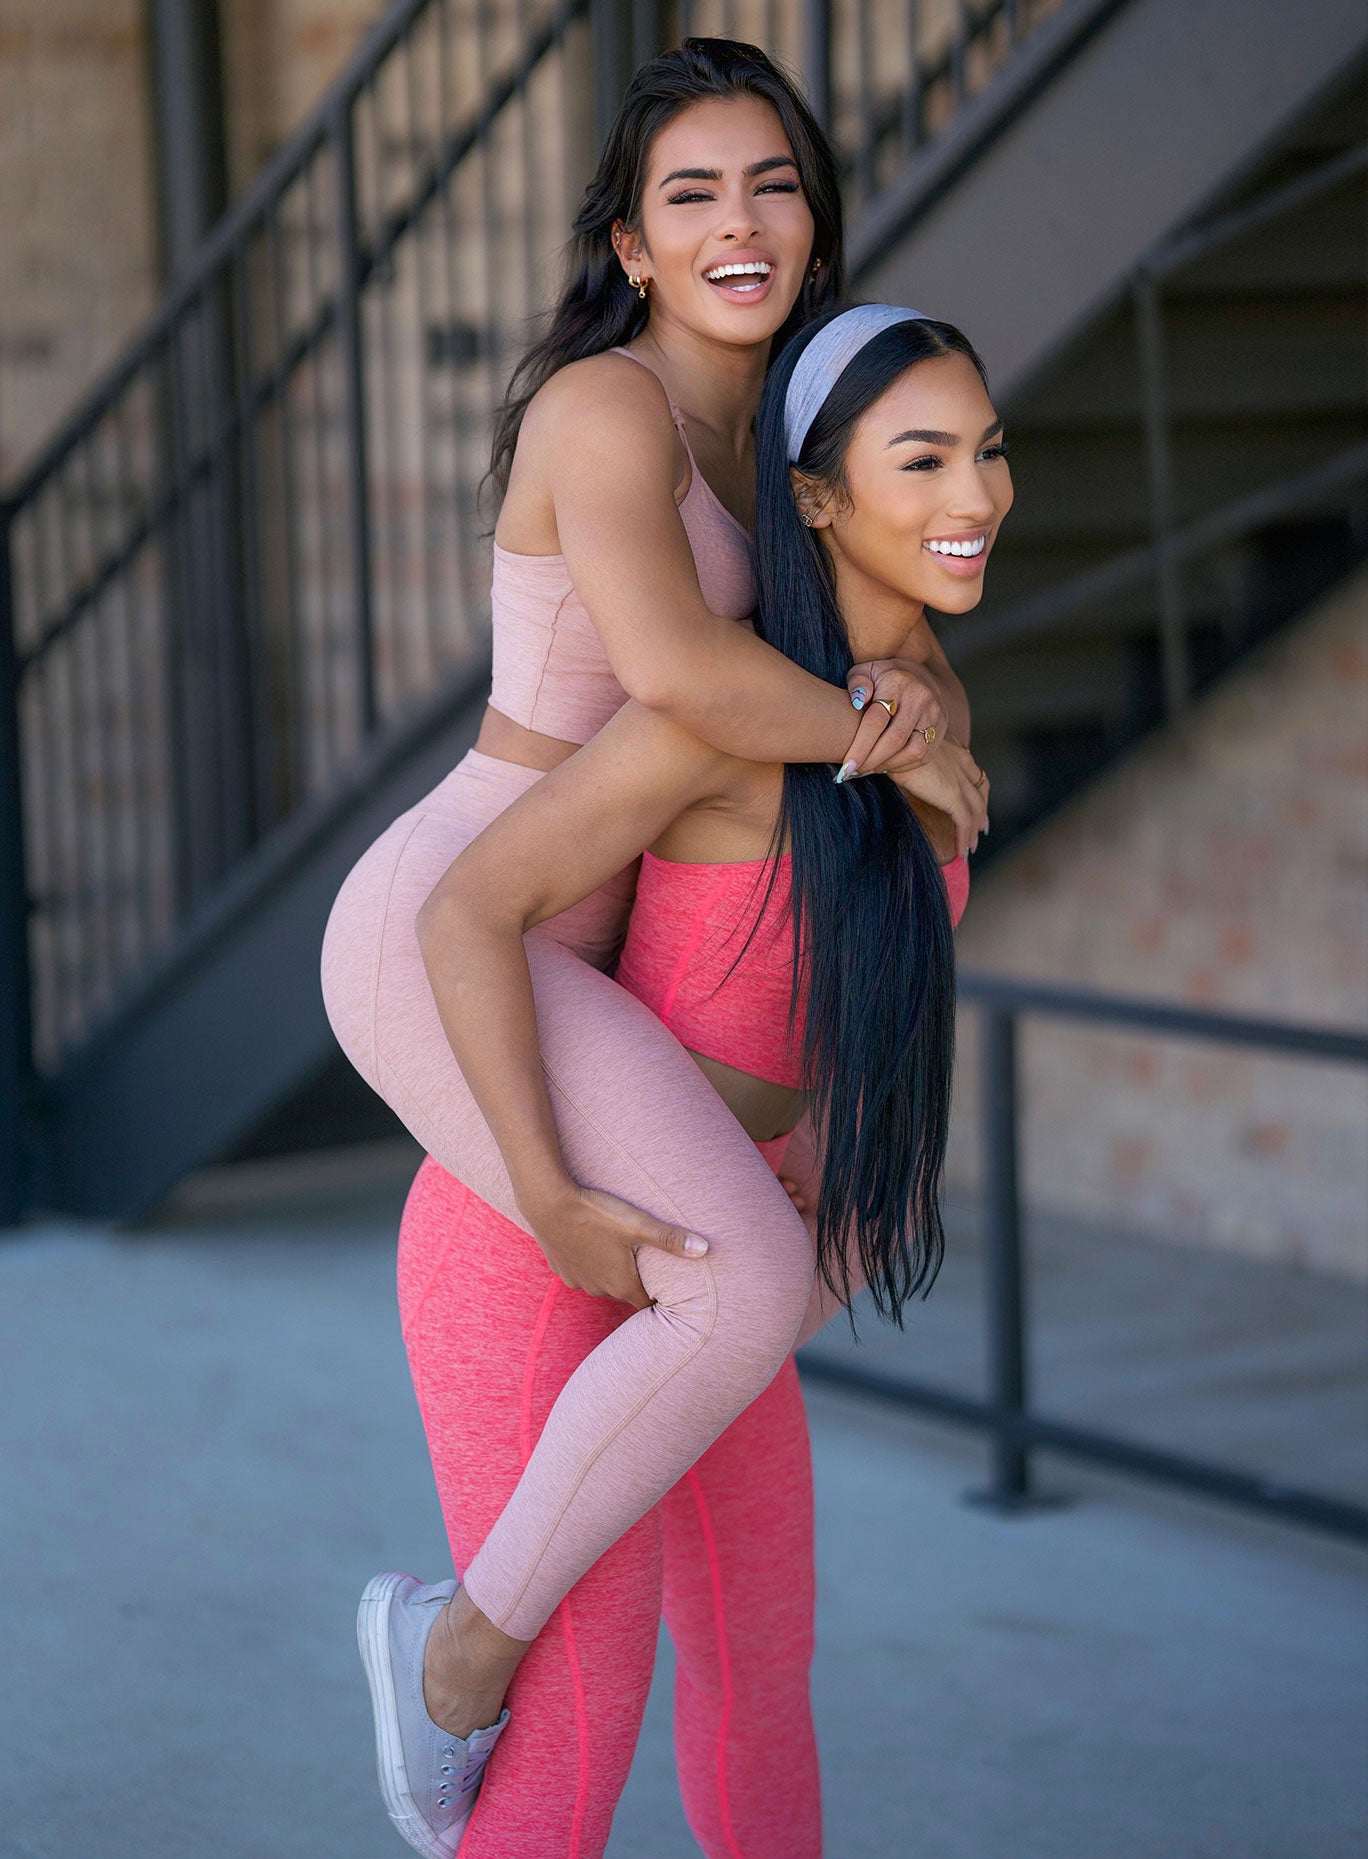 Picture of a model carrying another model on her back and wearing our uplift leggings in latte and papaya color along with the matching bras